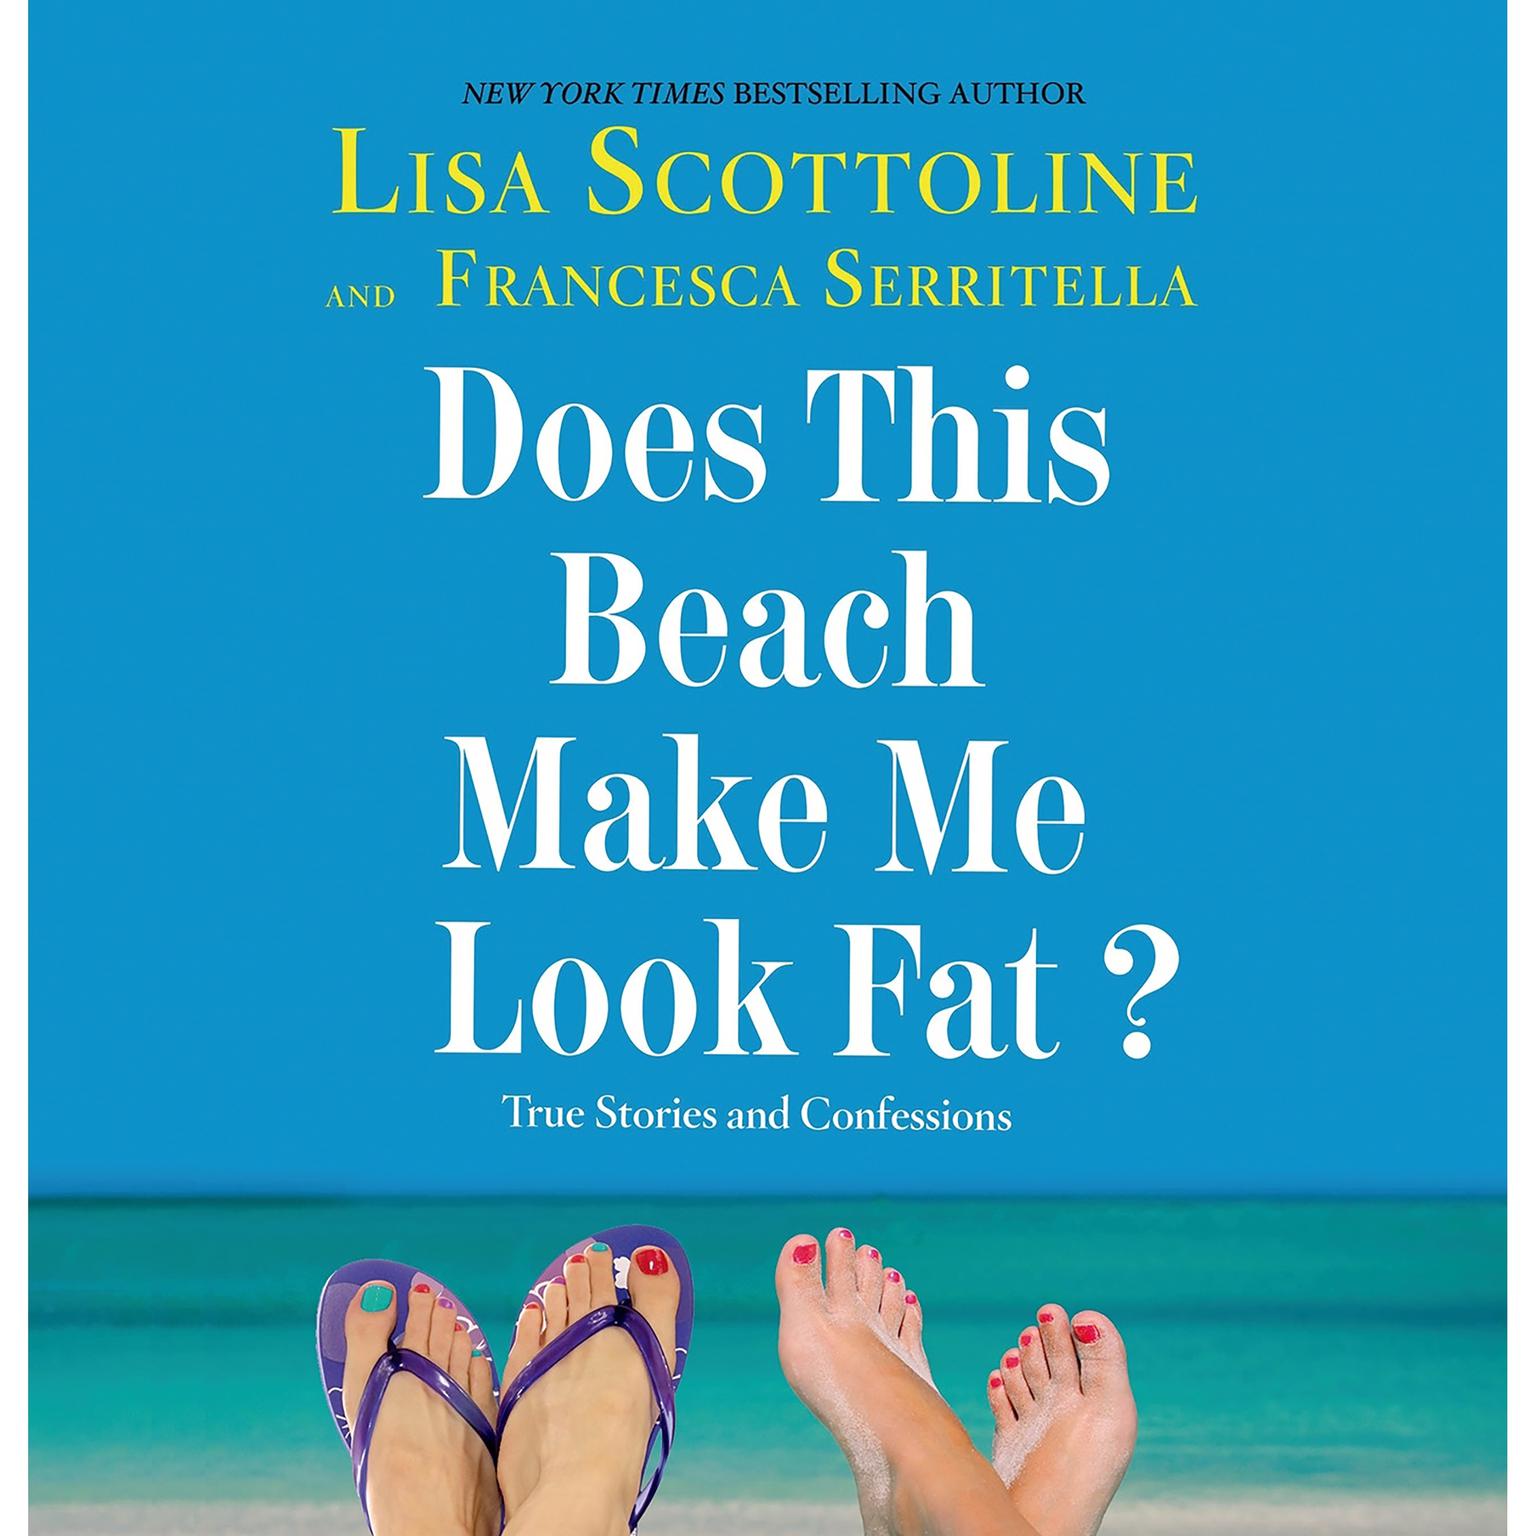 Does This Beach Make Me Look Fat?: True Stories and Confessions Audiobook, by Lisa Scottoline